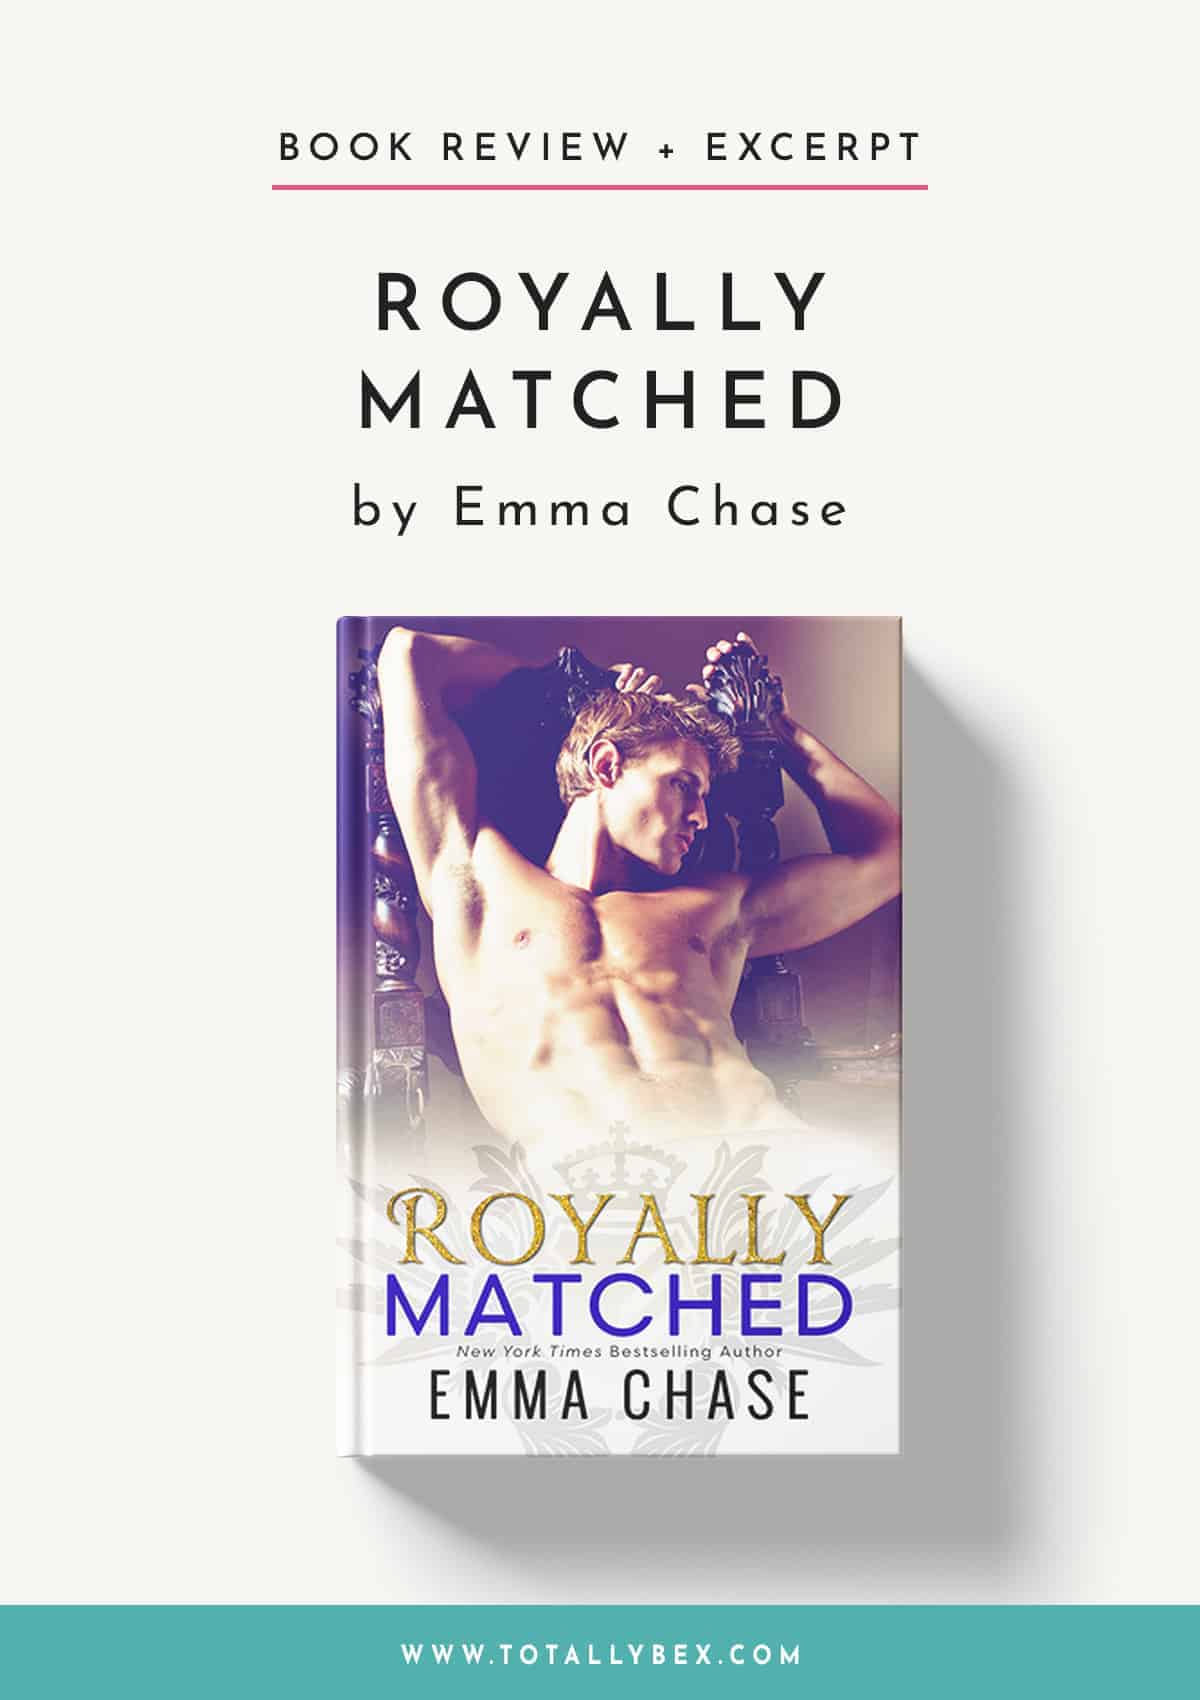 Royally Matched by Emma Chase-Book Review+Excerpt